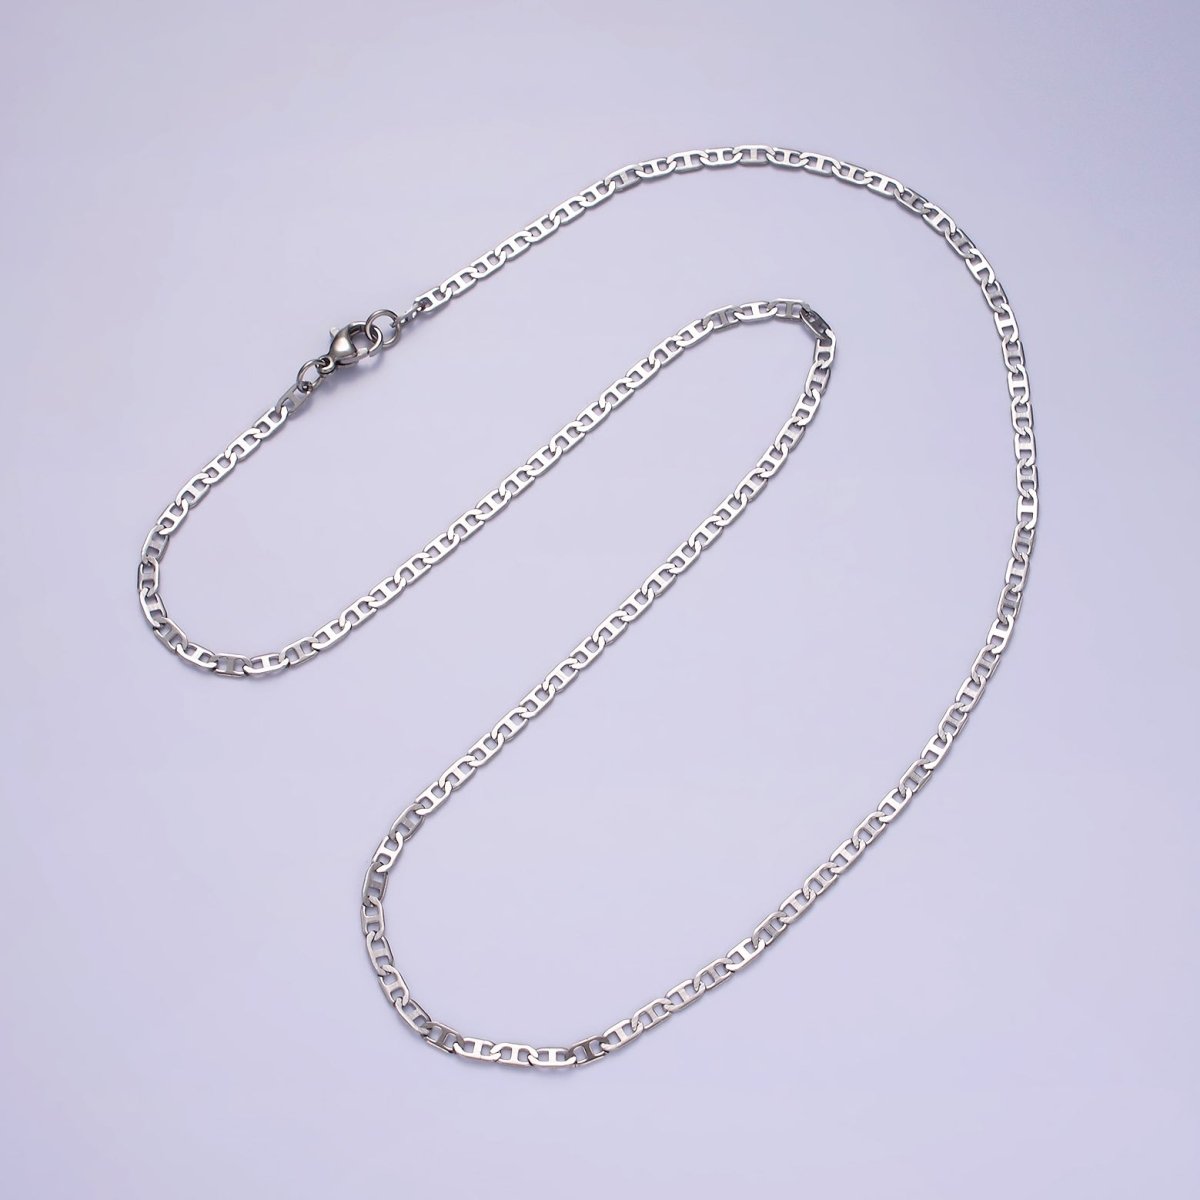 18.3 inch Stainless Steel Flat Mariner Chain For Wholesale Chains And Jewelry Making Supplies Findings | WA-2099 Clearance Pricing - DLUXCA